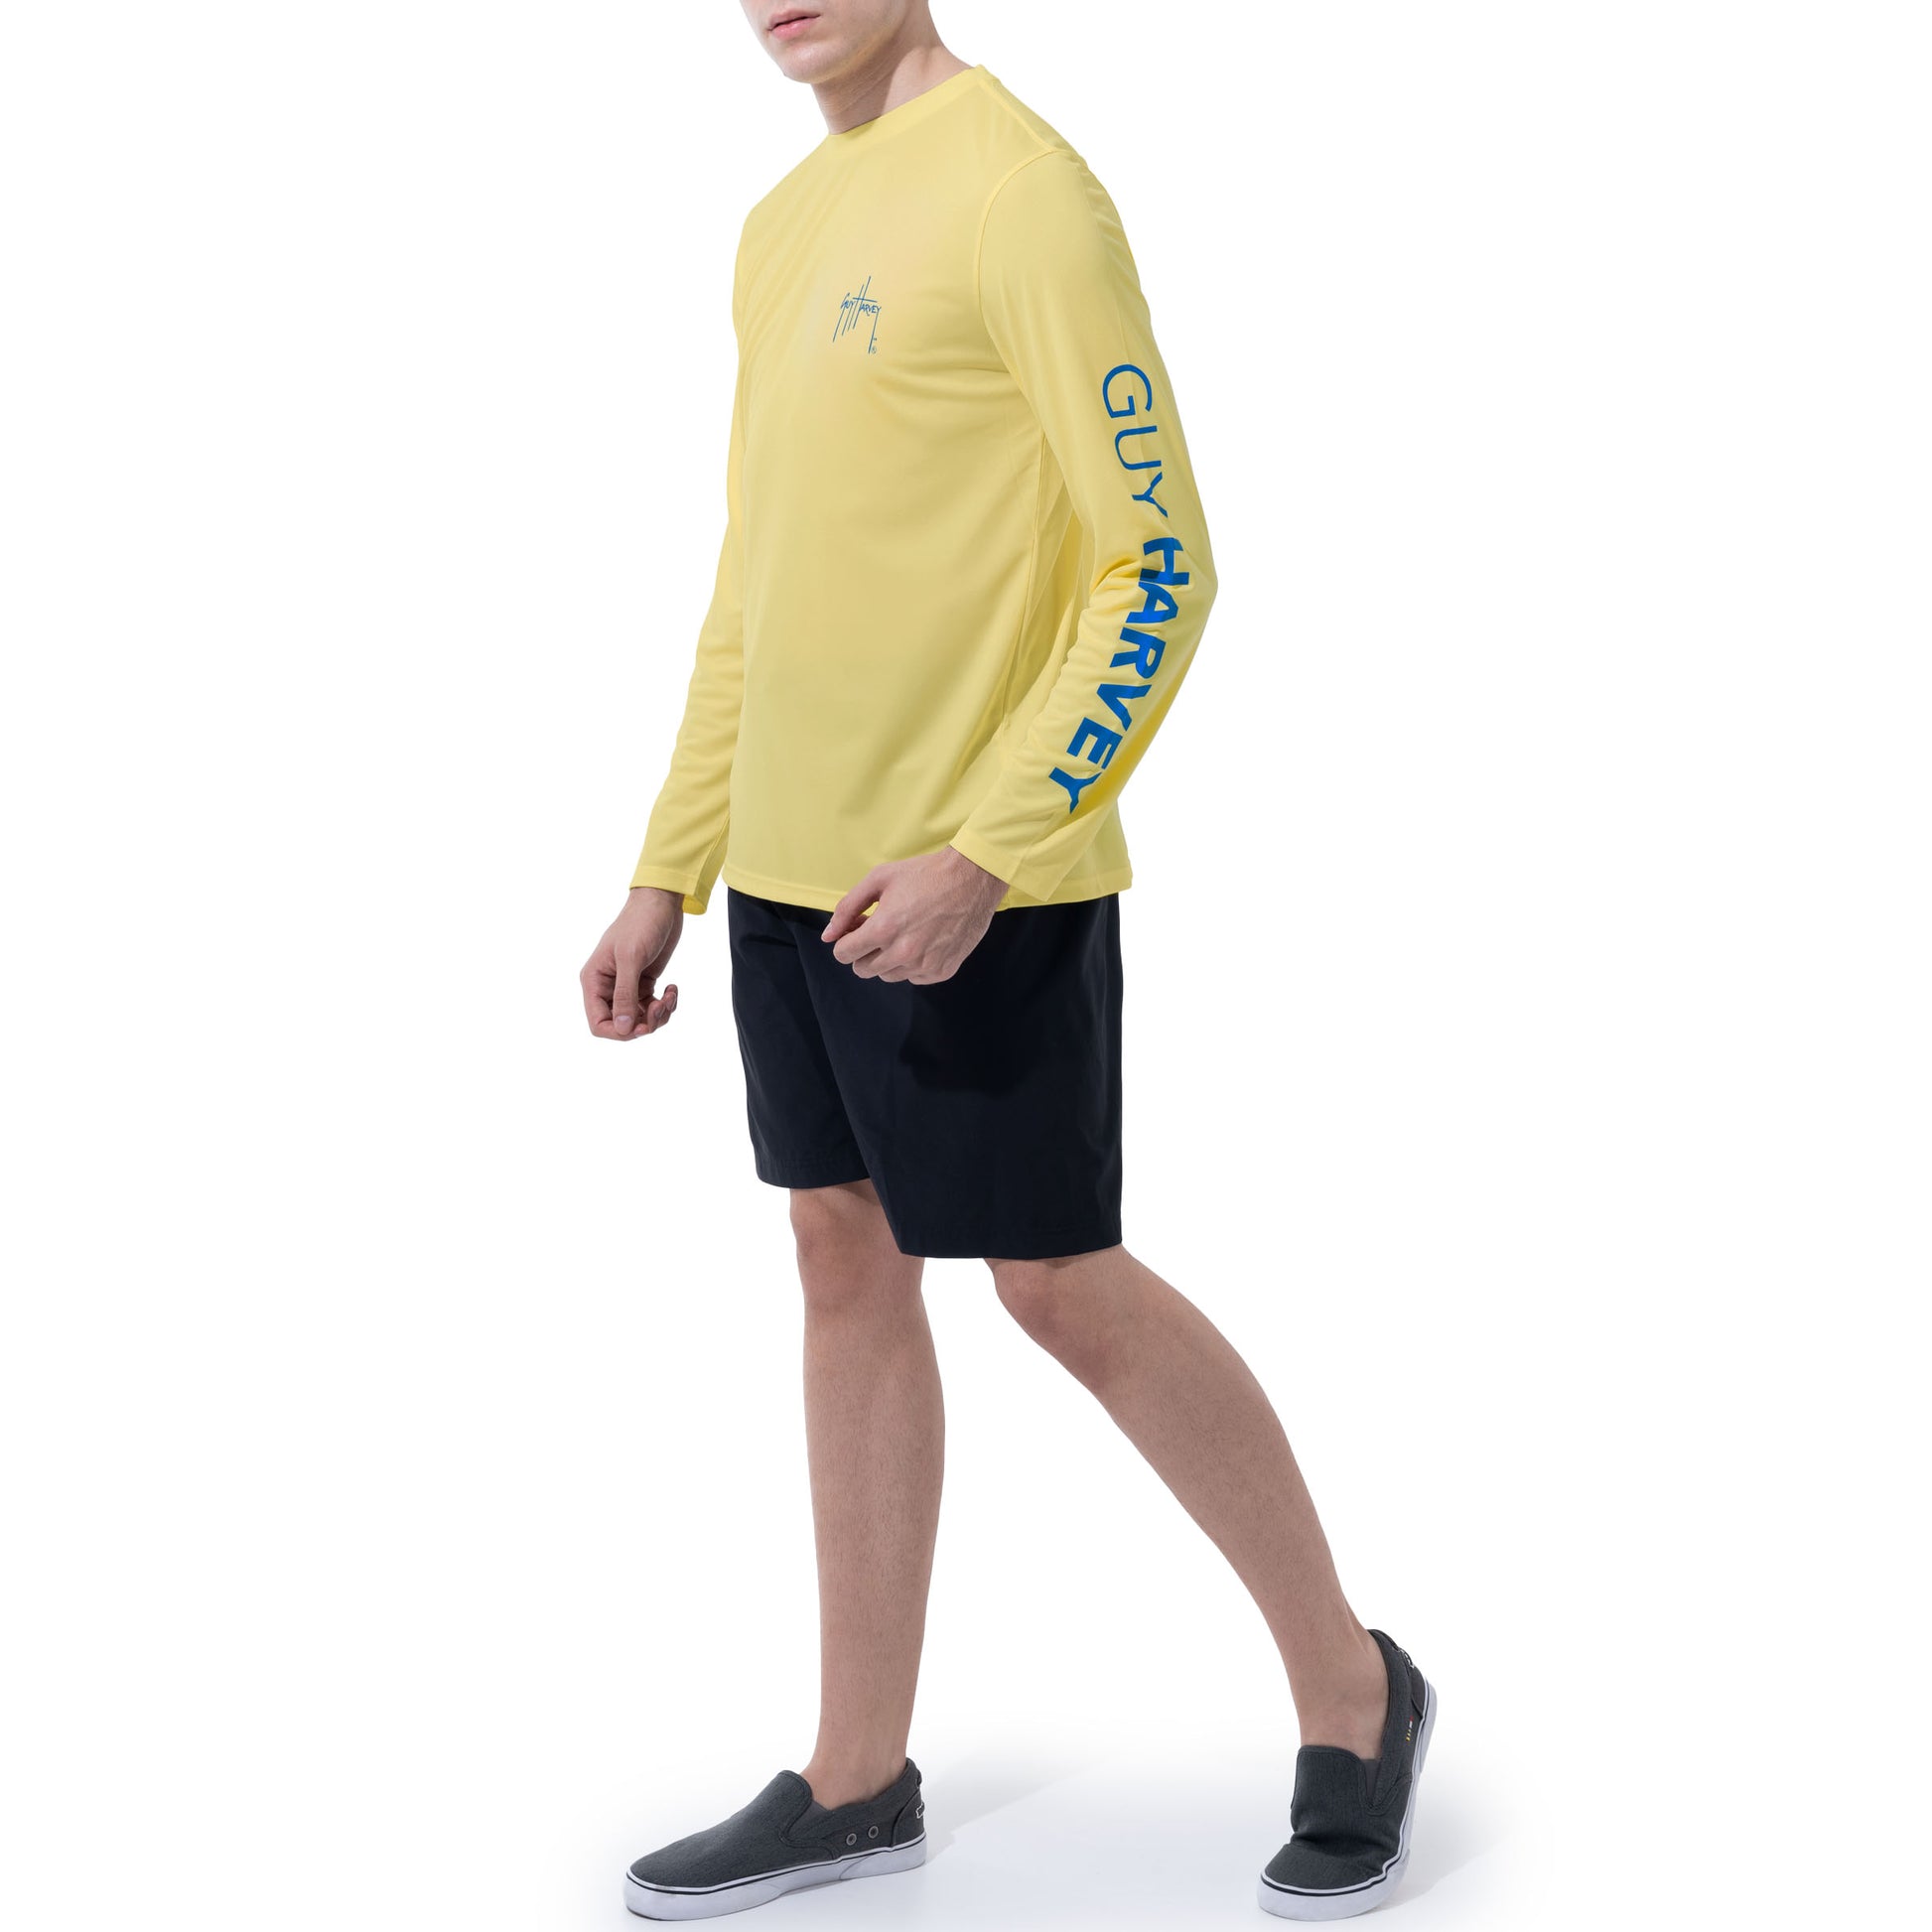 Men Long Sleeve Performance Fishing Sun Protection with UPF 50 Plus. Color Yellow Lifestyle